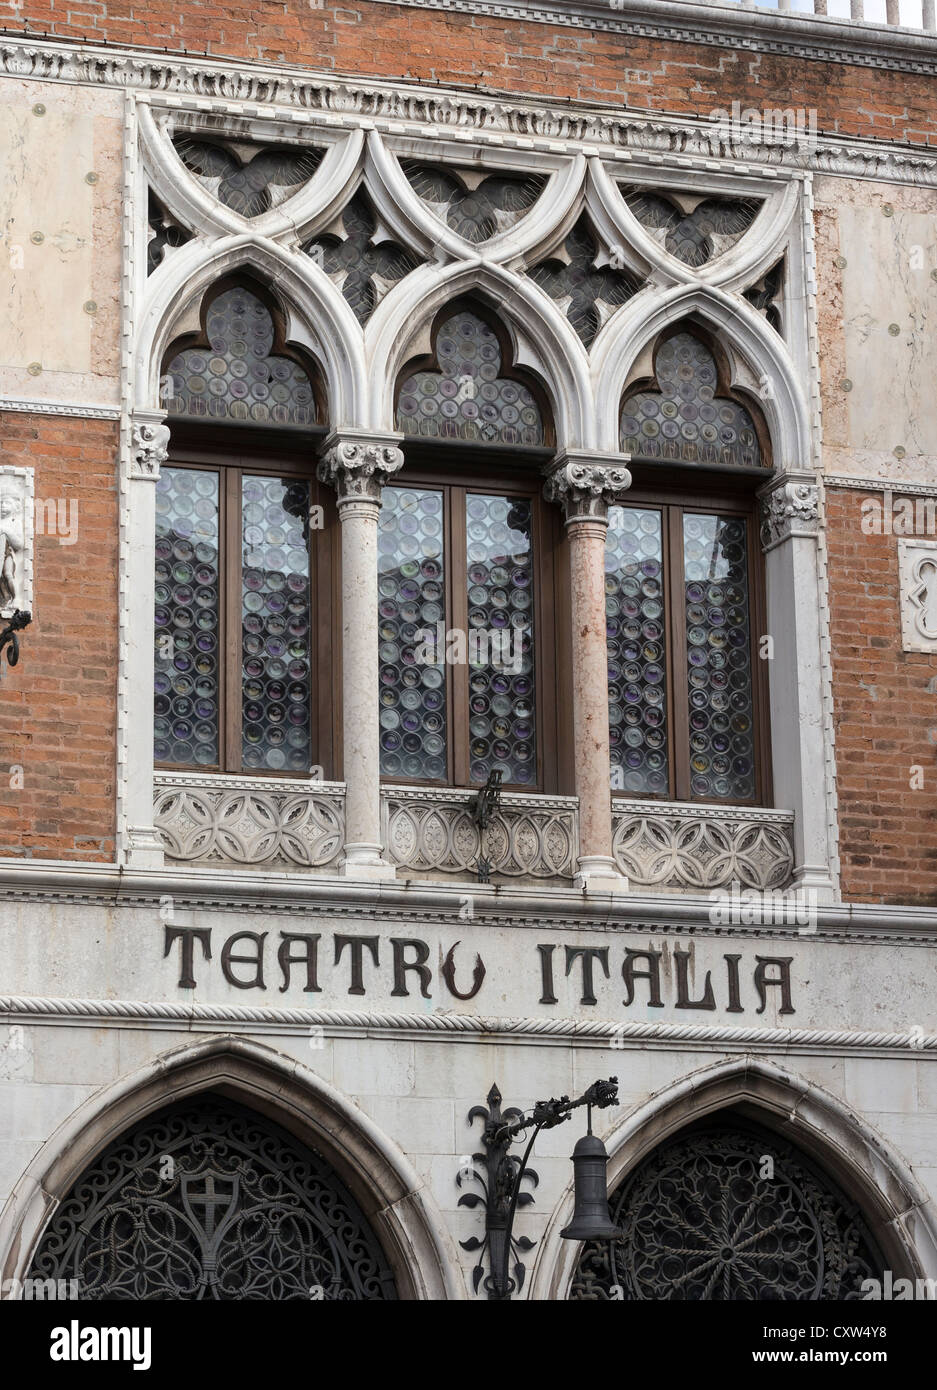 Detail of the facade of the Teatro Italia, showing lettering in wrought iron and typical Venetian Gothic architecture. Stock Photo